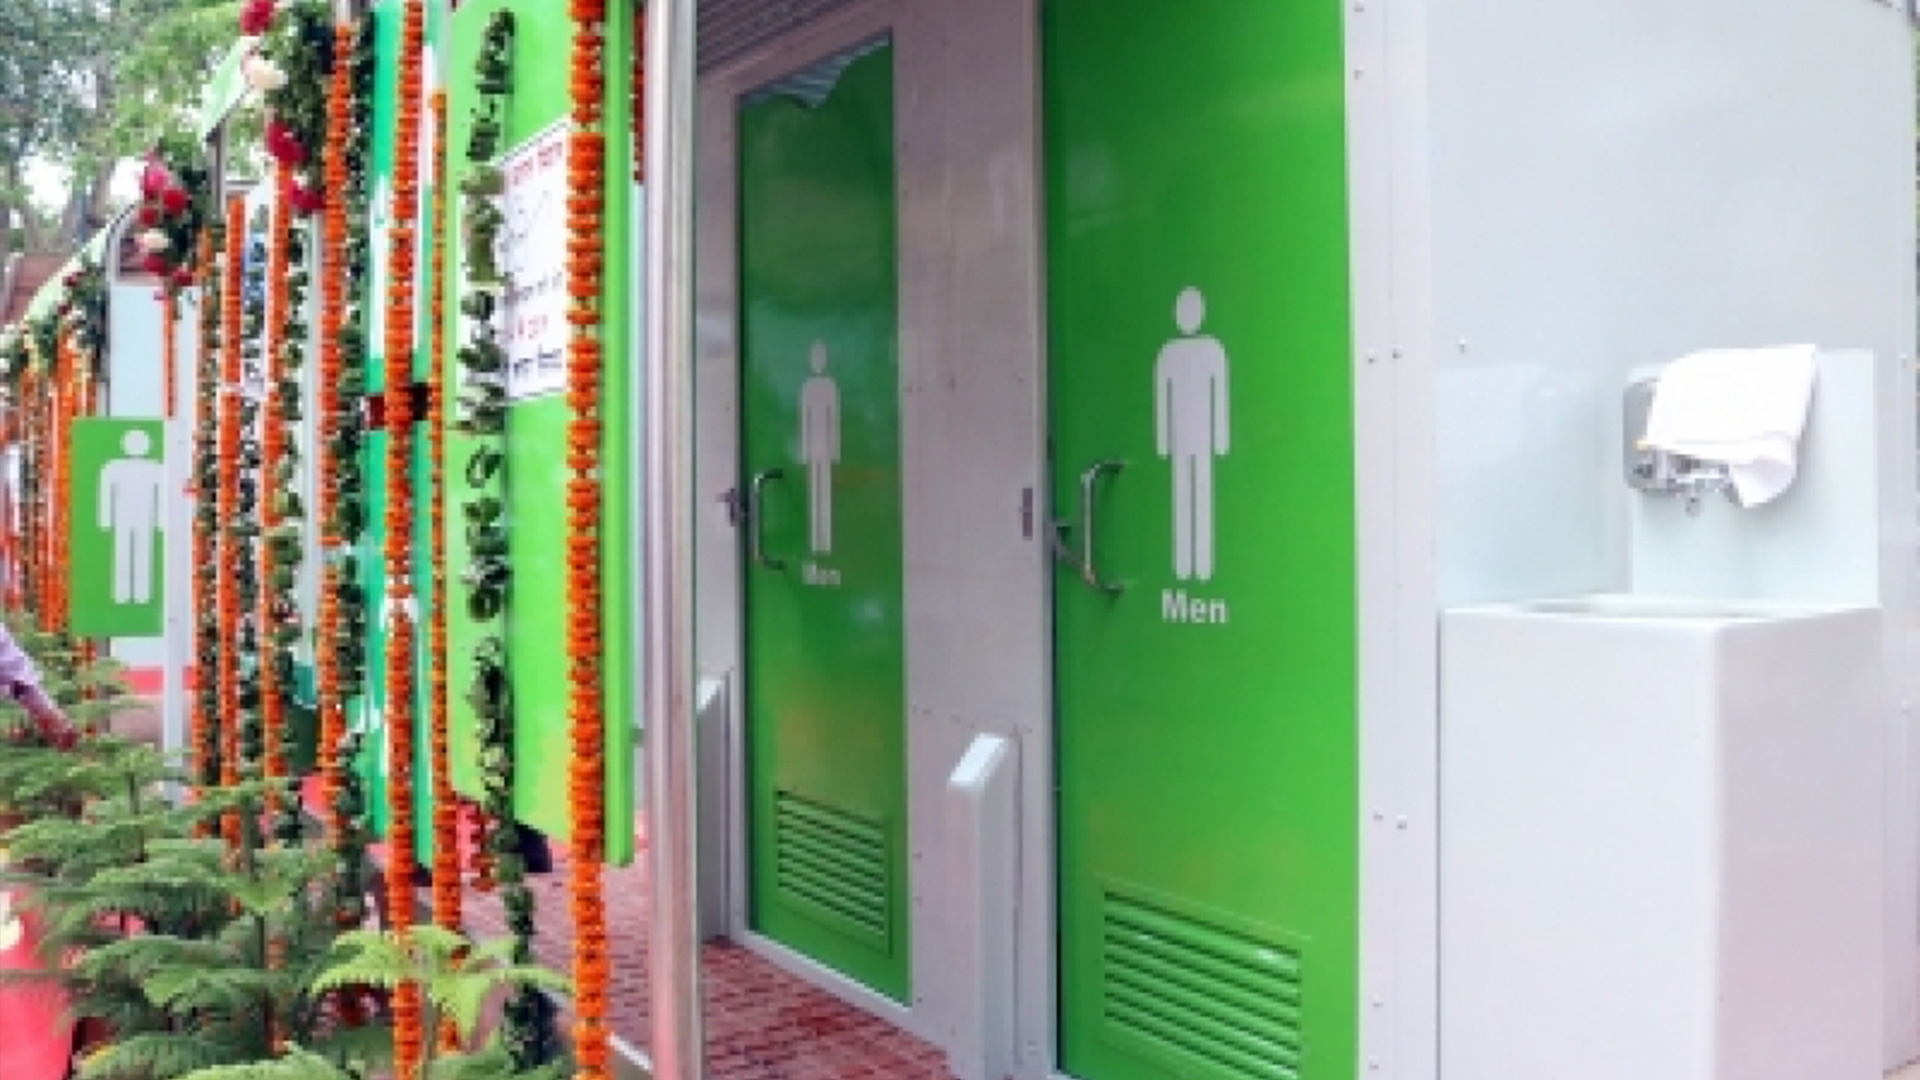 Construction of toilet units under Swachh Bharat Abhiyaan